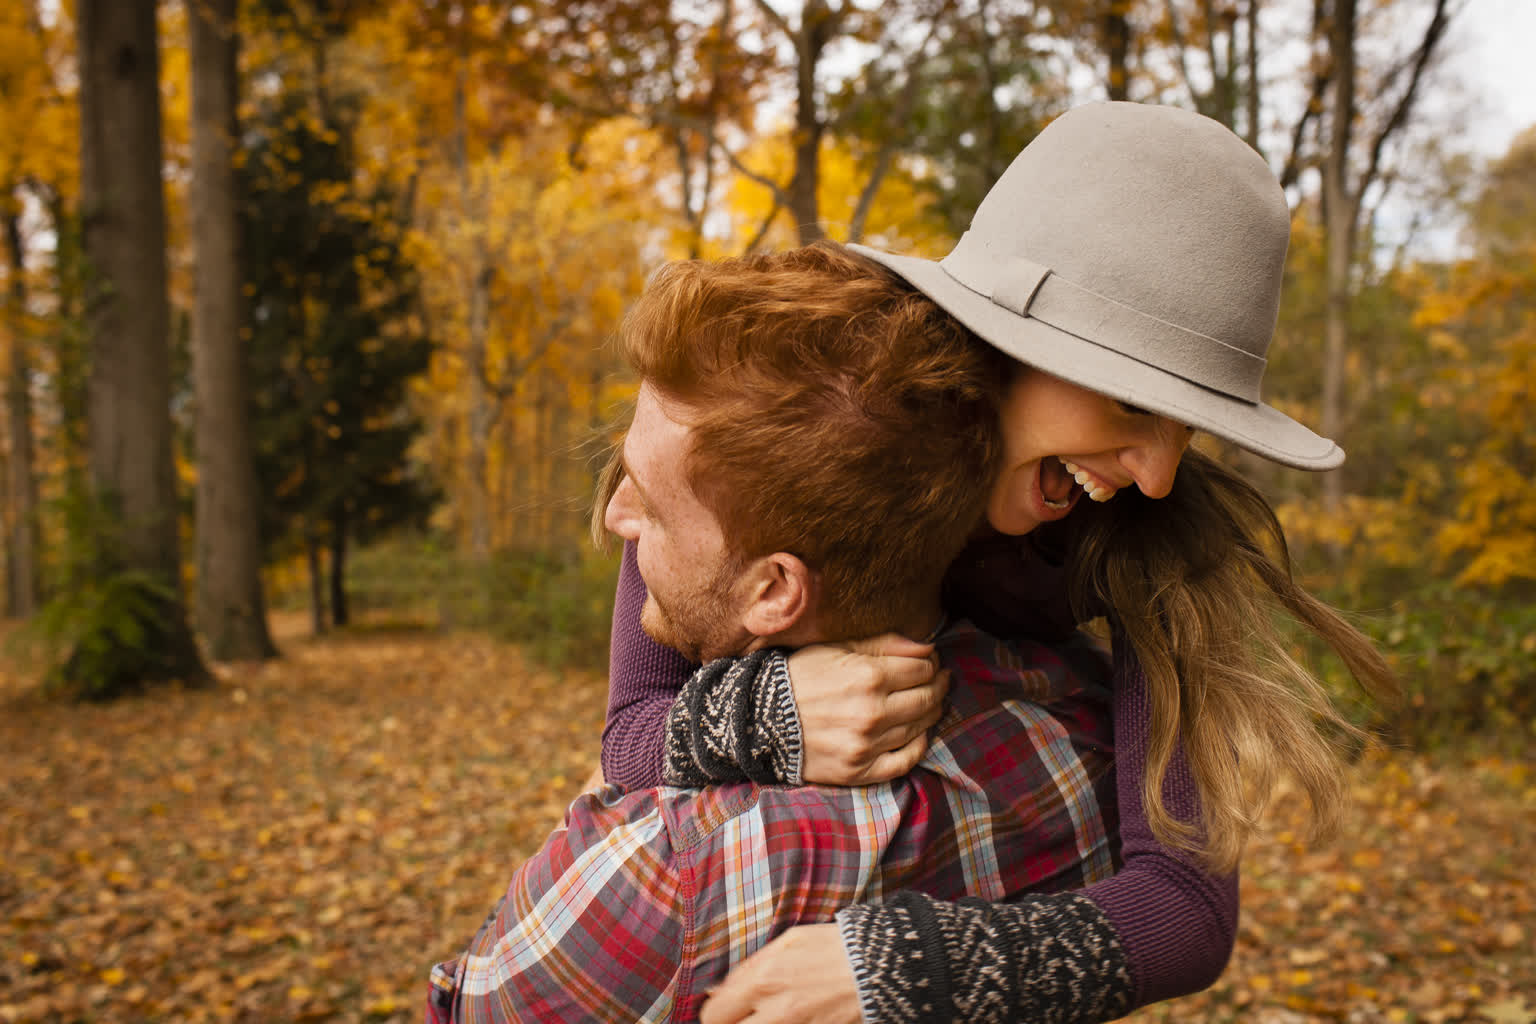 young-couple-hugging-in-autumn-forest-2022-03-07-23-55-13-utc.jpg